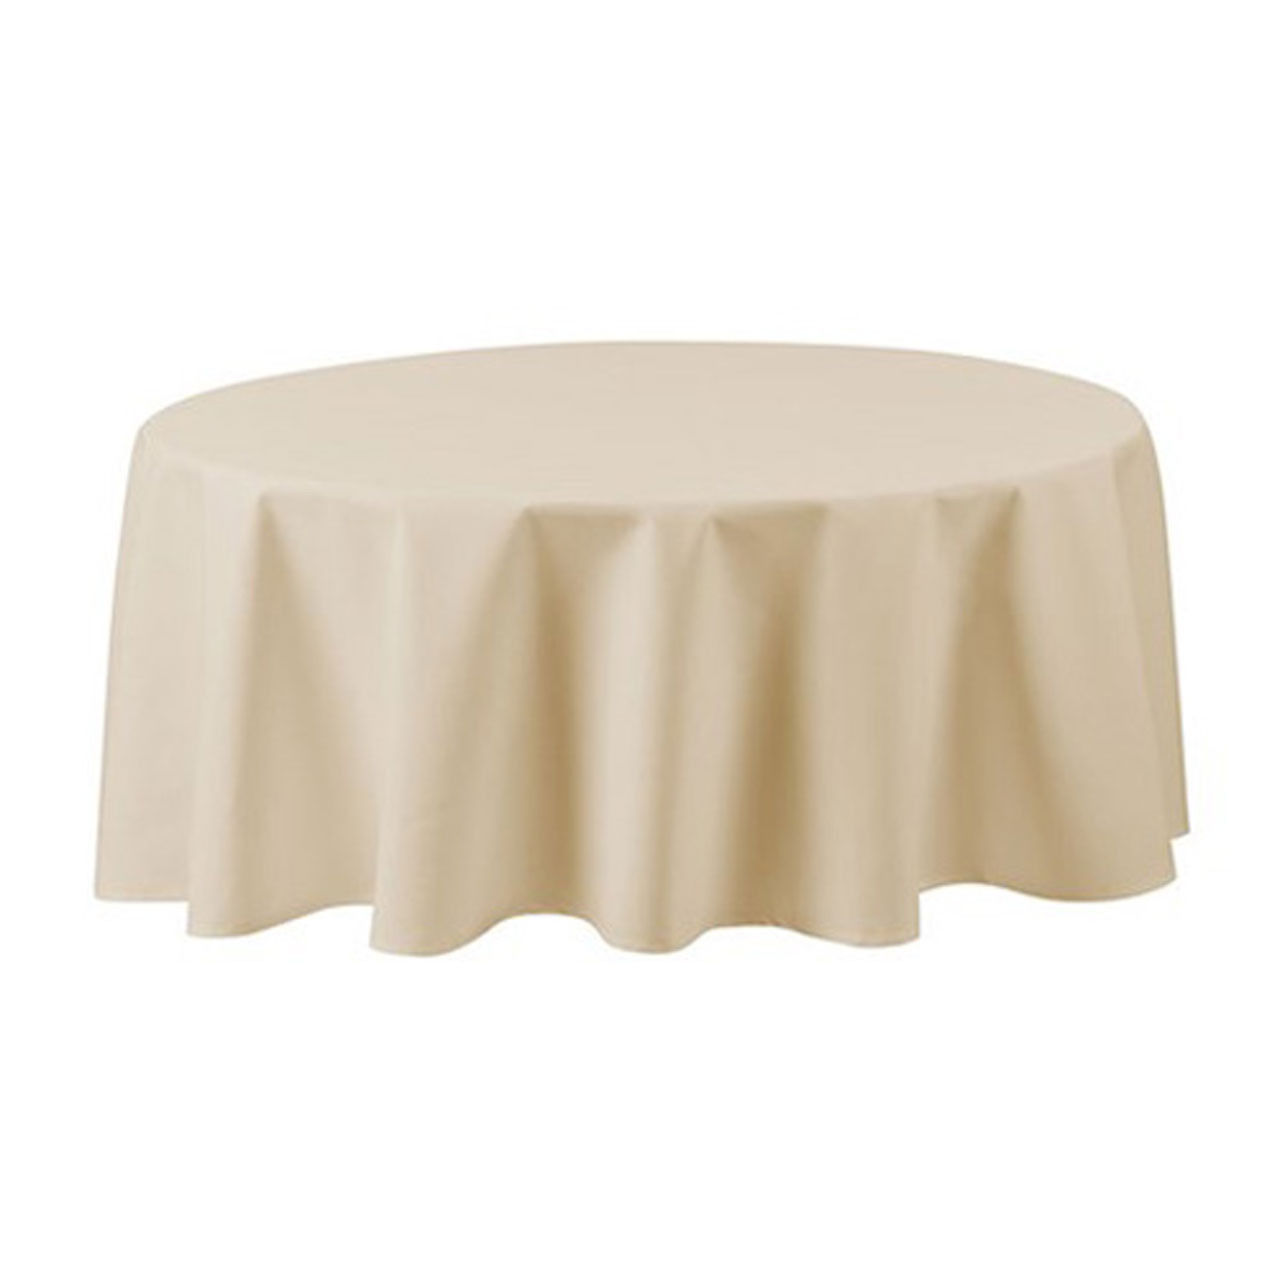 In a case of ivory tablecloths bulk, how many are included?